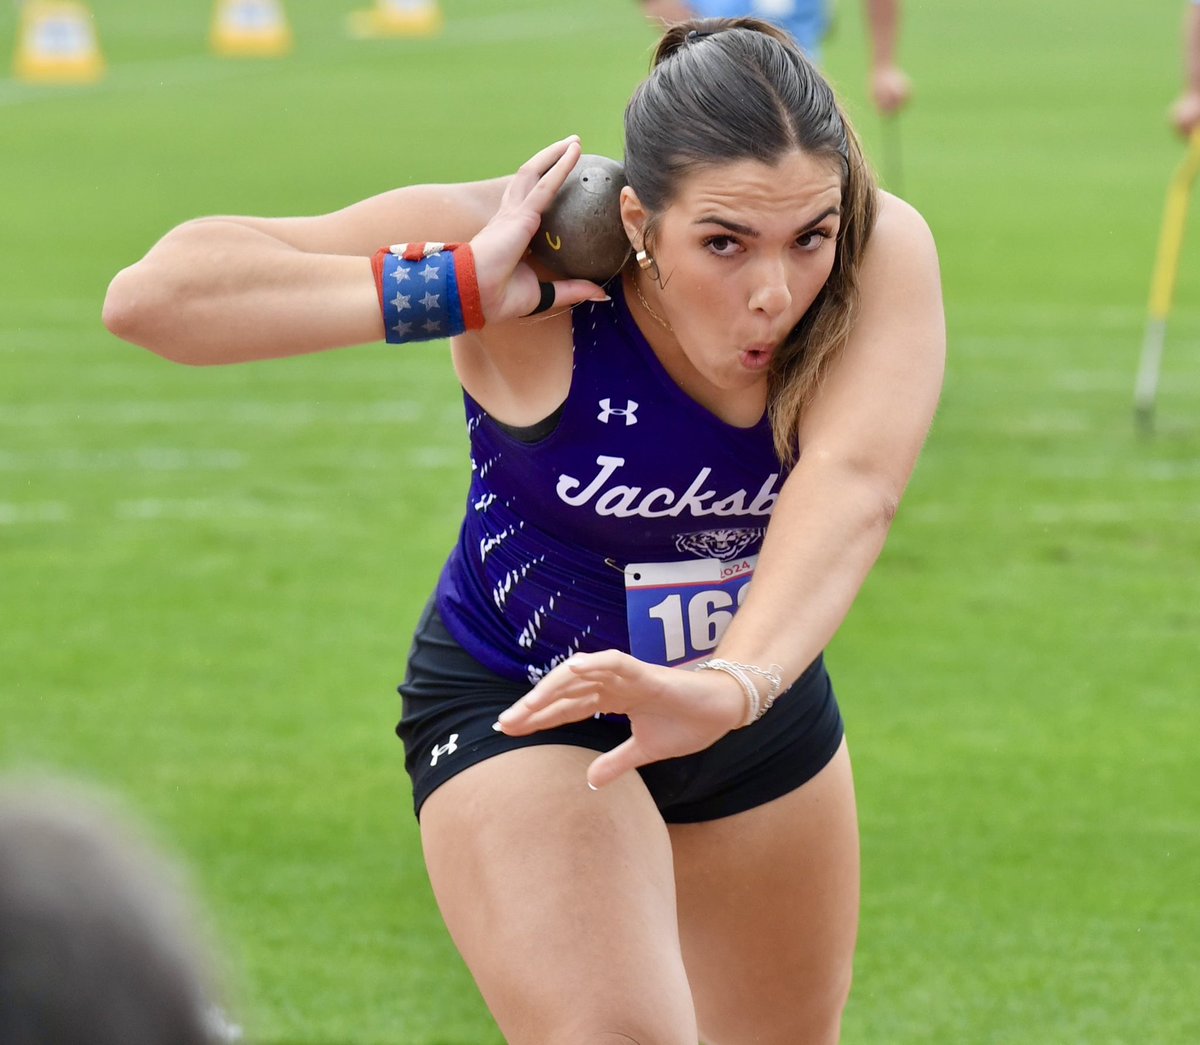 Jacksboro's Landrie Valenzuela claims the bronze in the Class 3A girls shot put at the UIL State track and field meet in Austin. @Hull_TRN @JISDSocialMedia